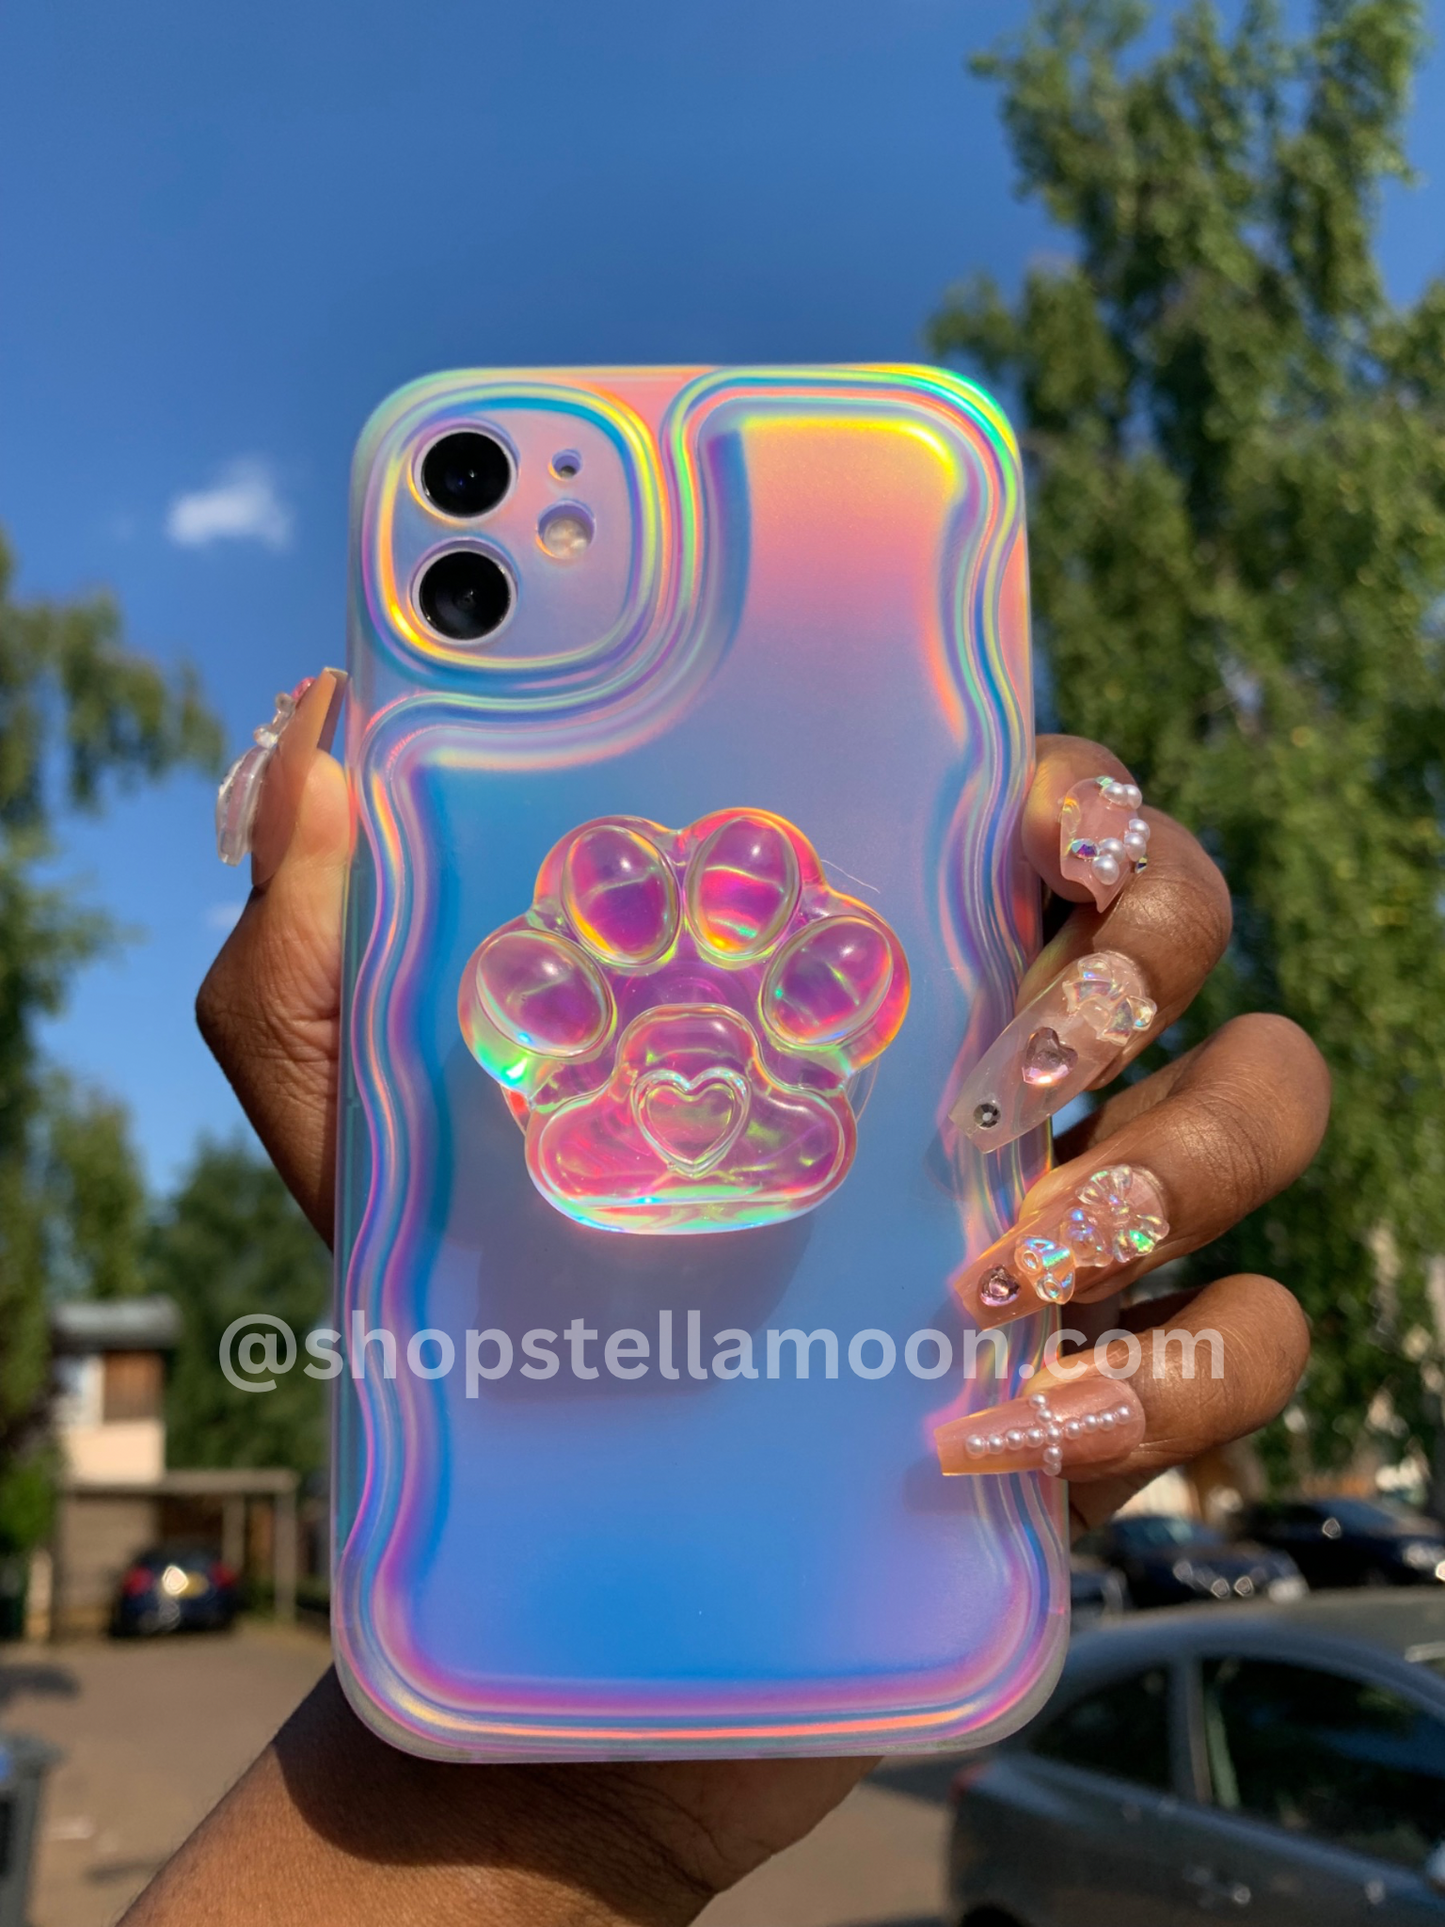 PAWFECT HOLO IPHONE CASE ($29)